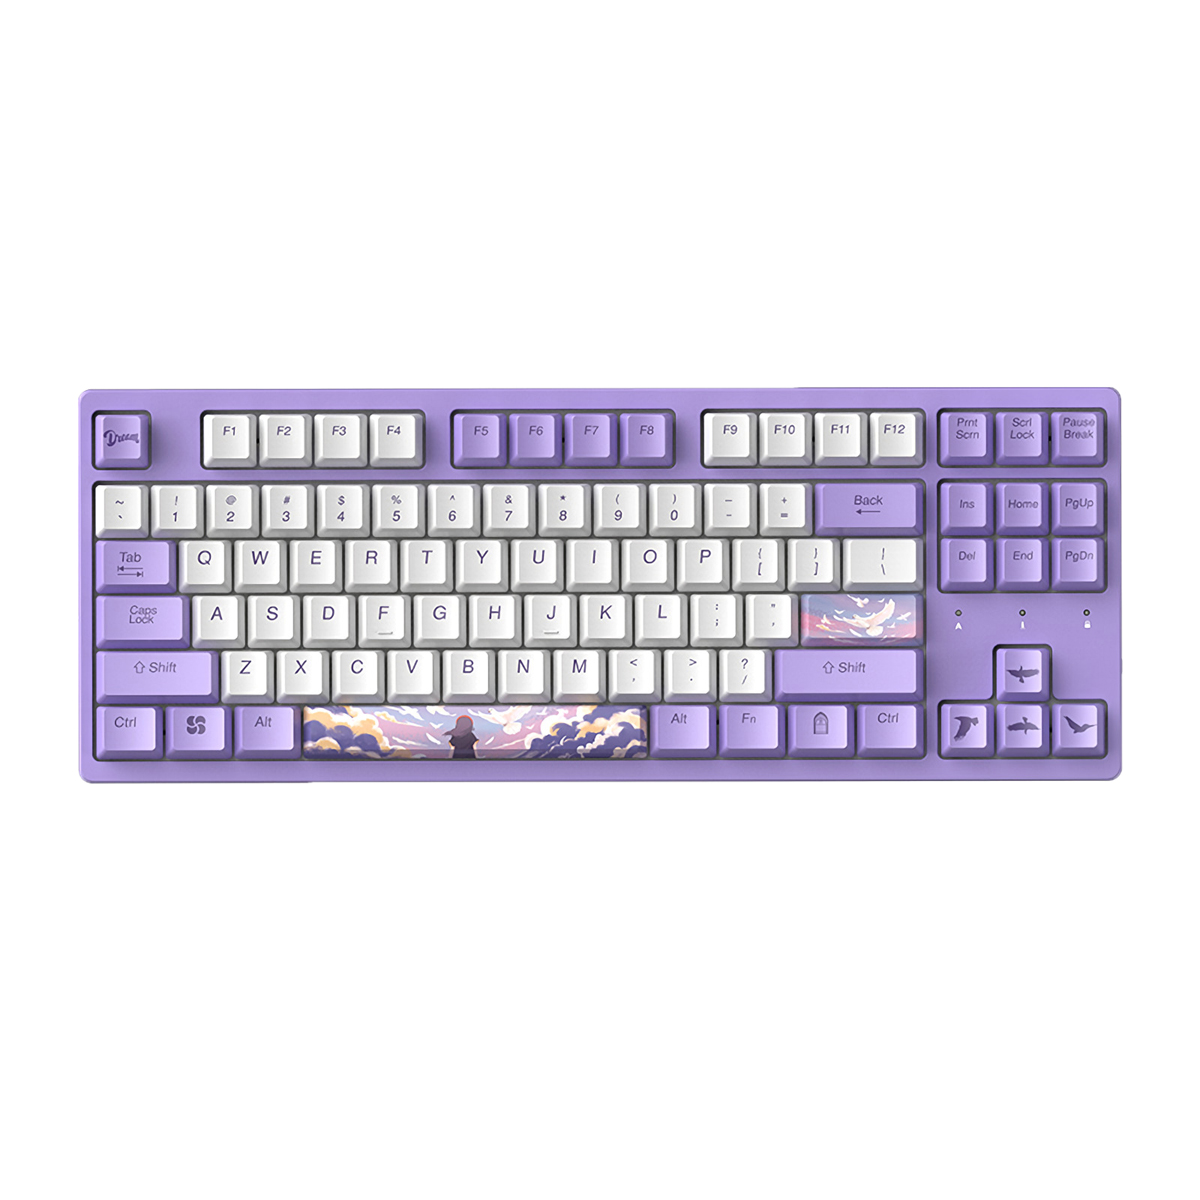 Find DAREU A87 Mechanical Keyboard Dream Theme Wired White Backlight 87 Keys Cherry MX Switch Purple PBT Keycaps Gaming Keyboard for Sale on Gipsybee.com with cryptocurrencies